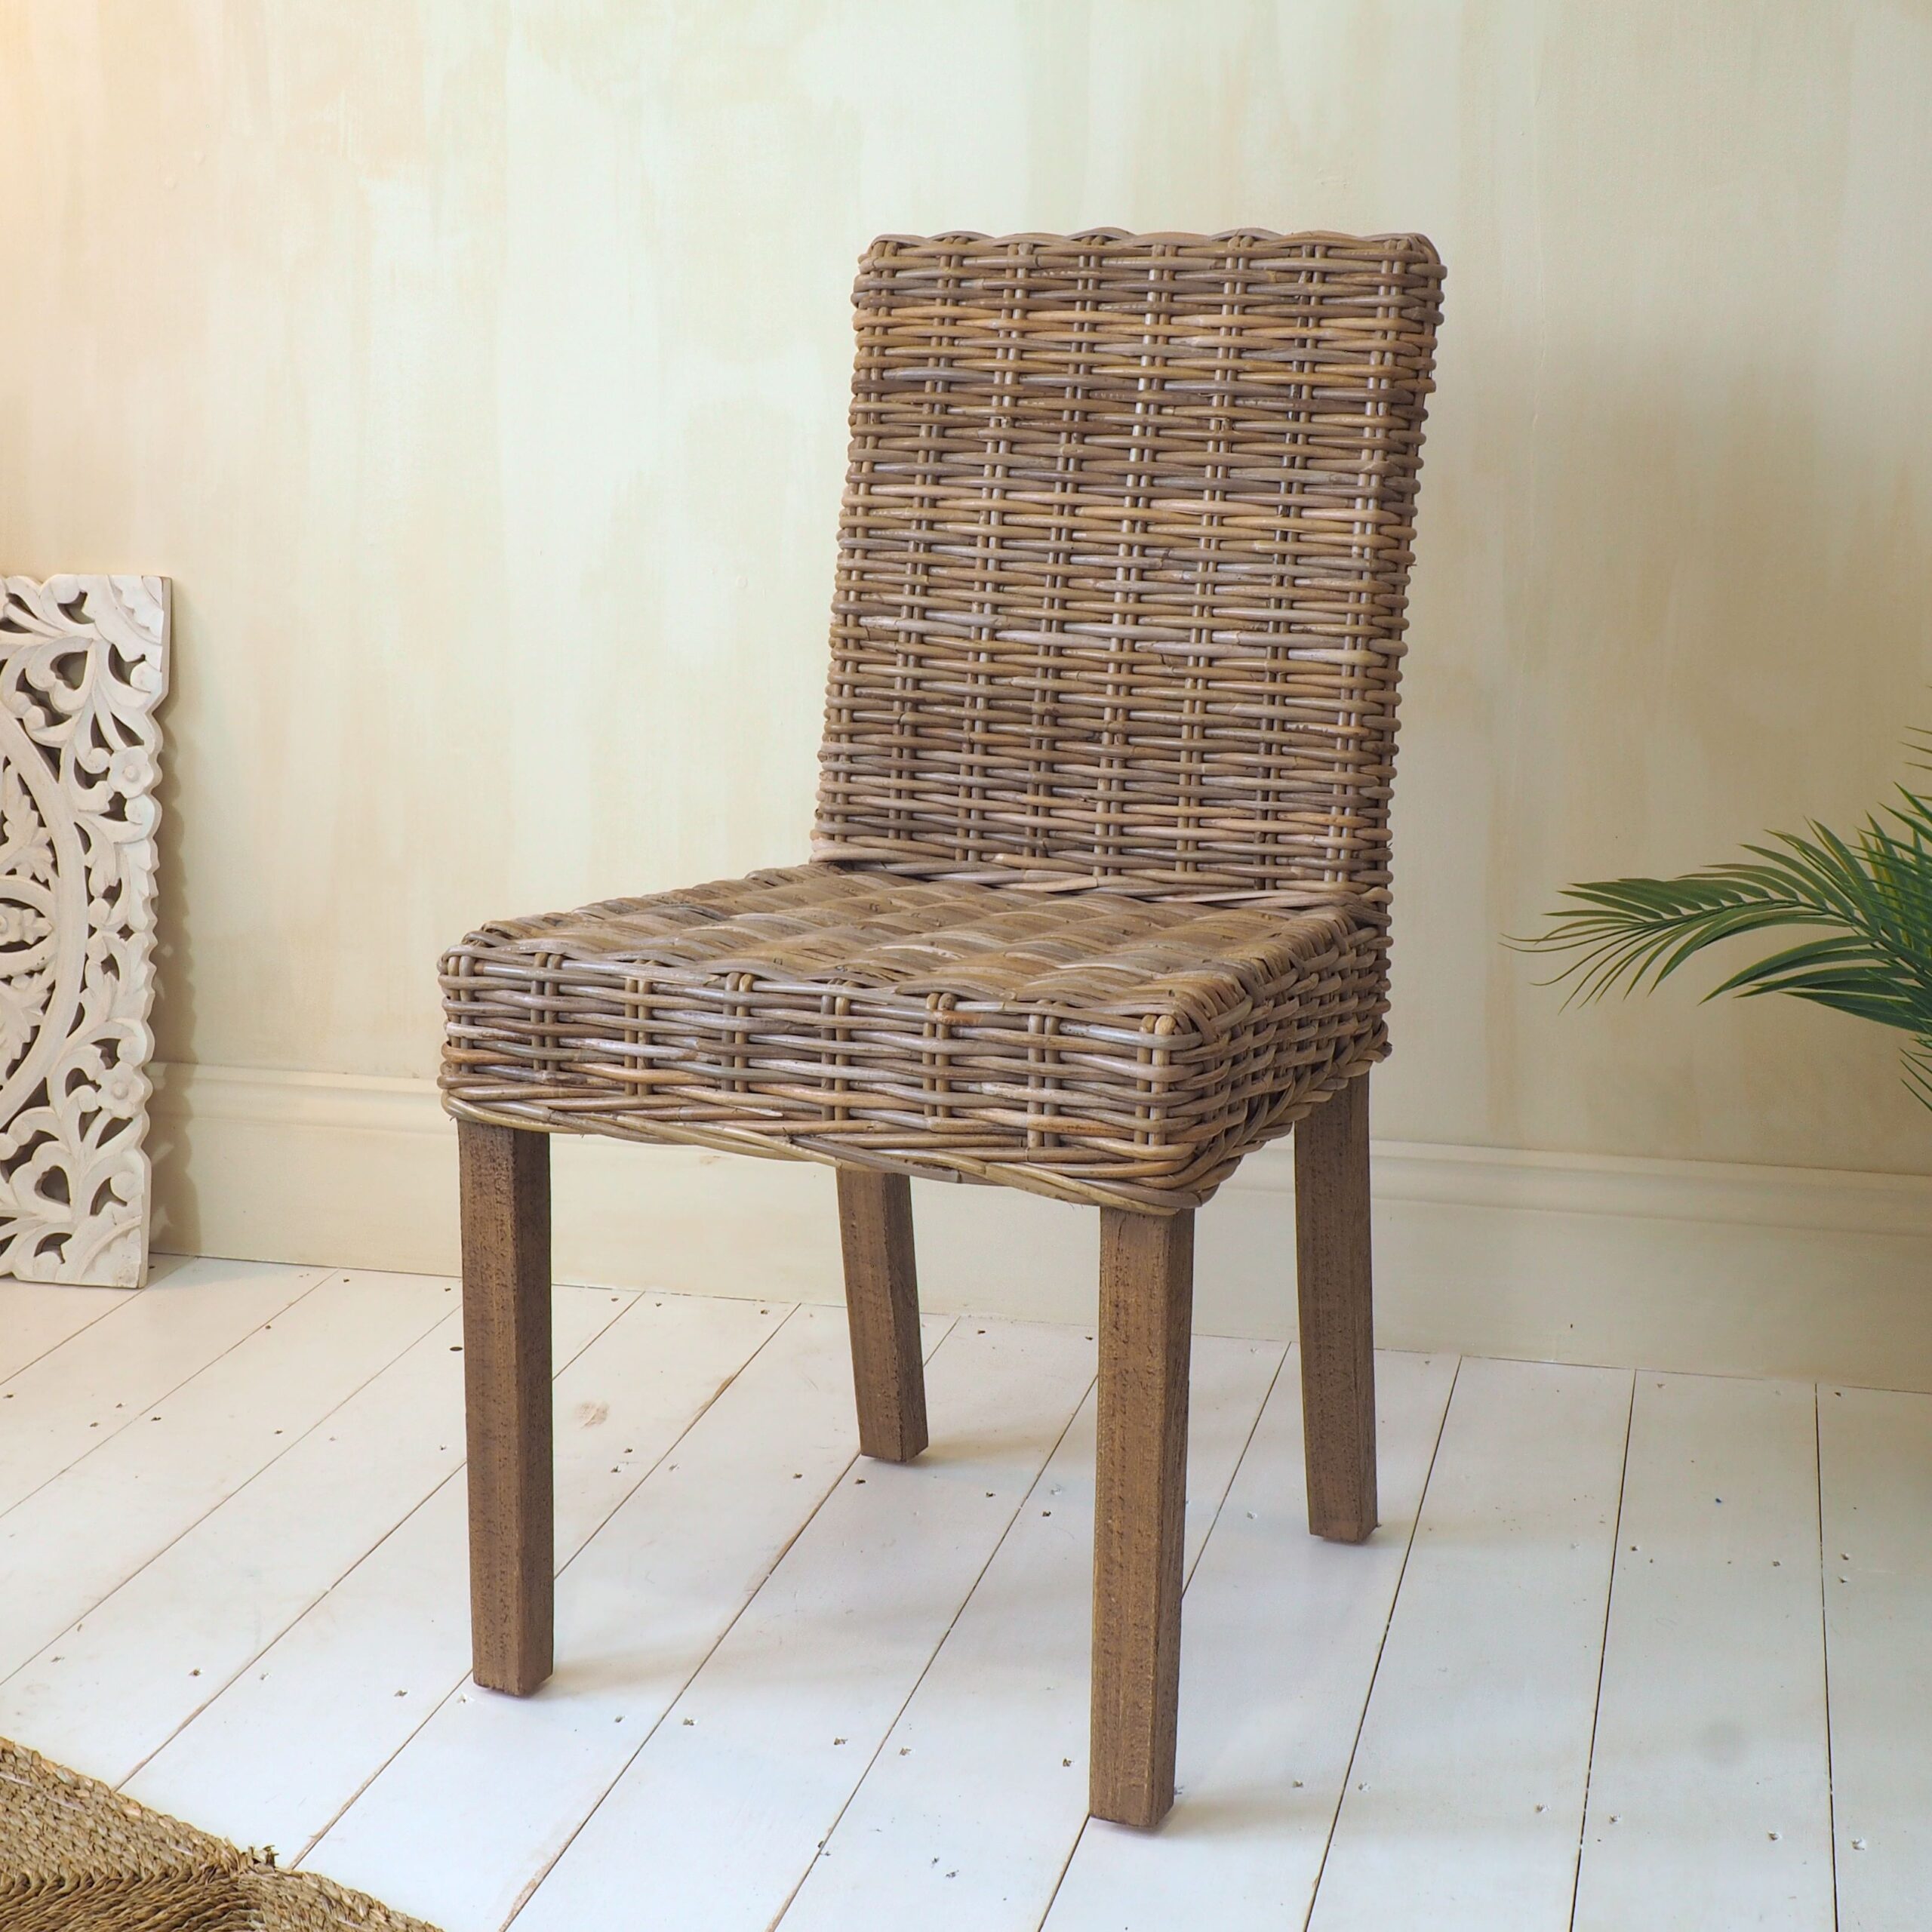 Wood and wicker natural dining chair on white wooden floor